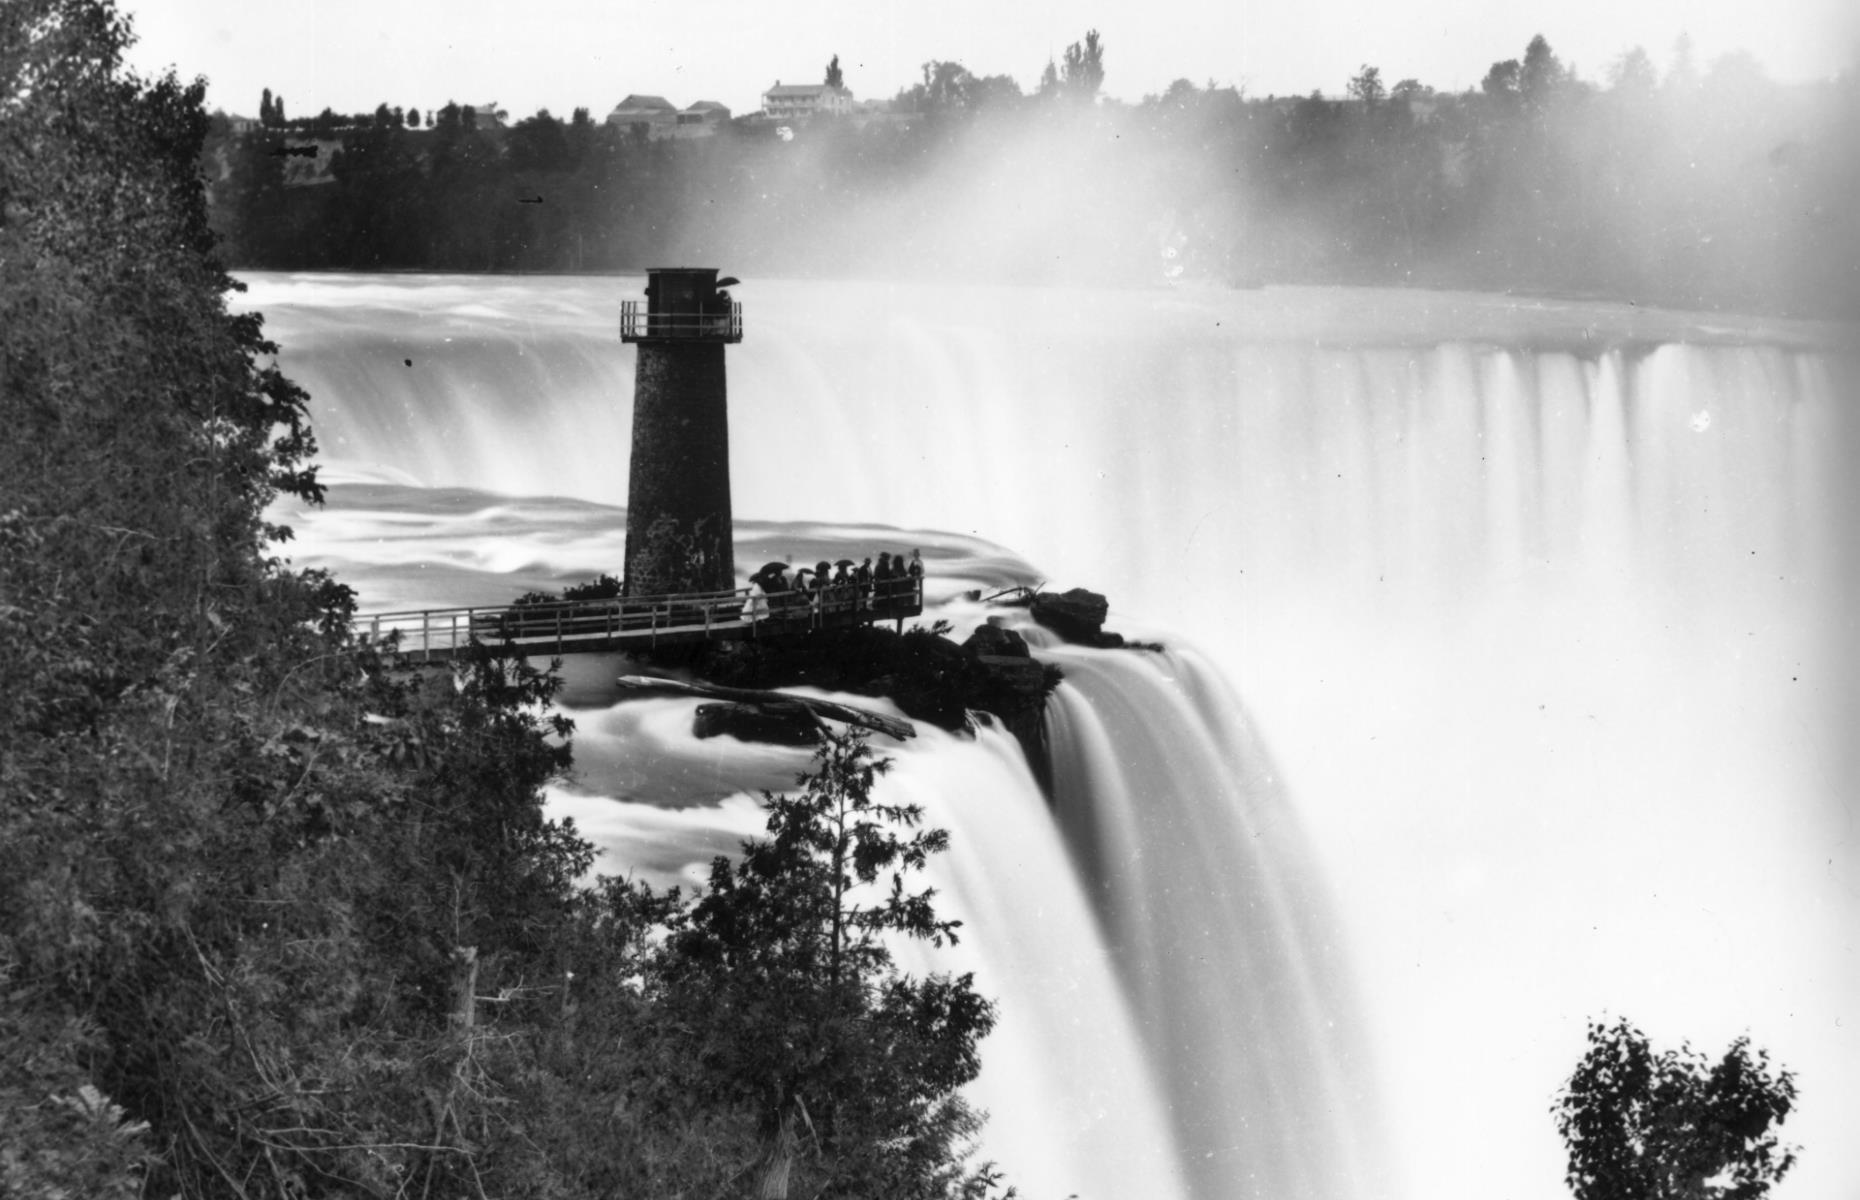 <p>The gushing great waterfall has always fascinated its onlookers, and back in 1859 it was no different. Look closely and you can see a small crowd of tourists standing beneath Terrapin Tower, built in 1833 at the edge of Horseshoe Falls (the Canadian section). A wooden bridge was constructed earlier in 1827 for people to drink in the incredible views across the water. The bridge was an instant hit and attracted visitors from both America and Europe, before tightrope artist Blondin's famous performances over the falls in 1859 helped catapult the attraction to further international fame. </p>